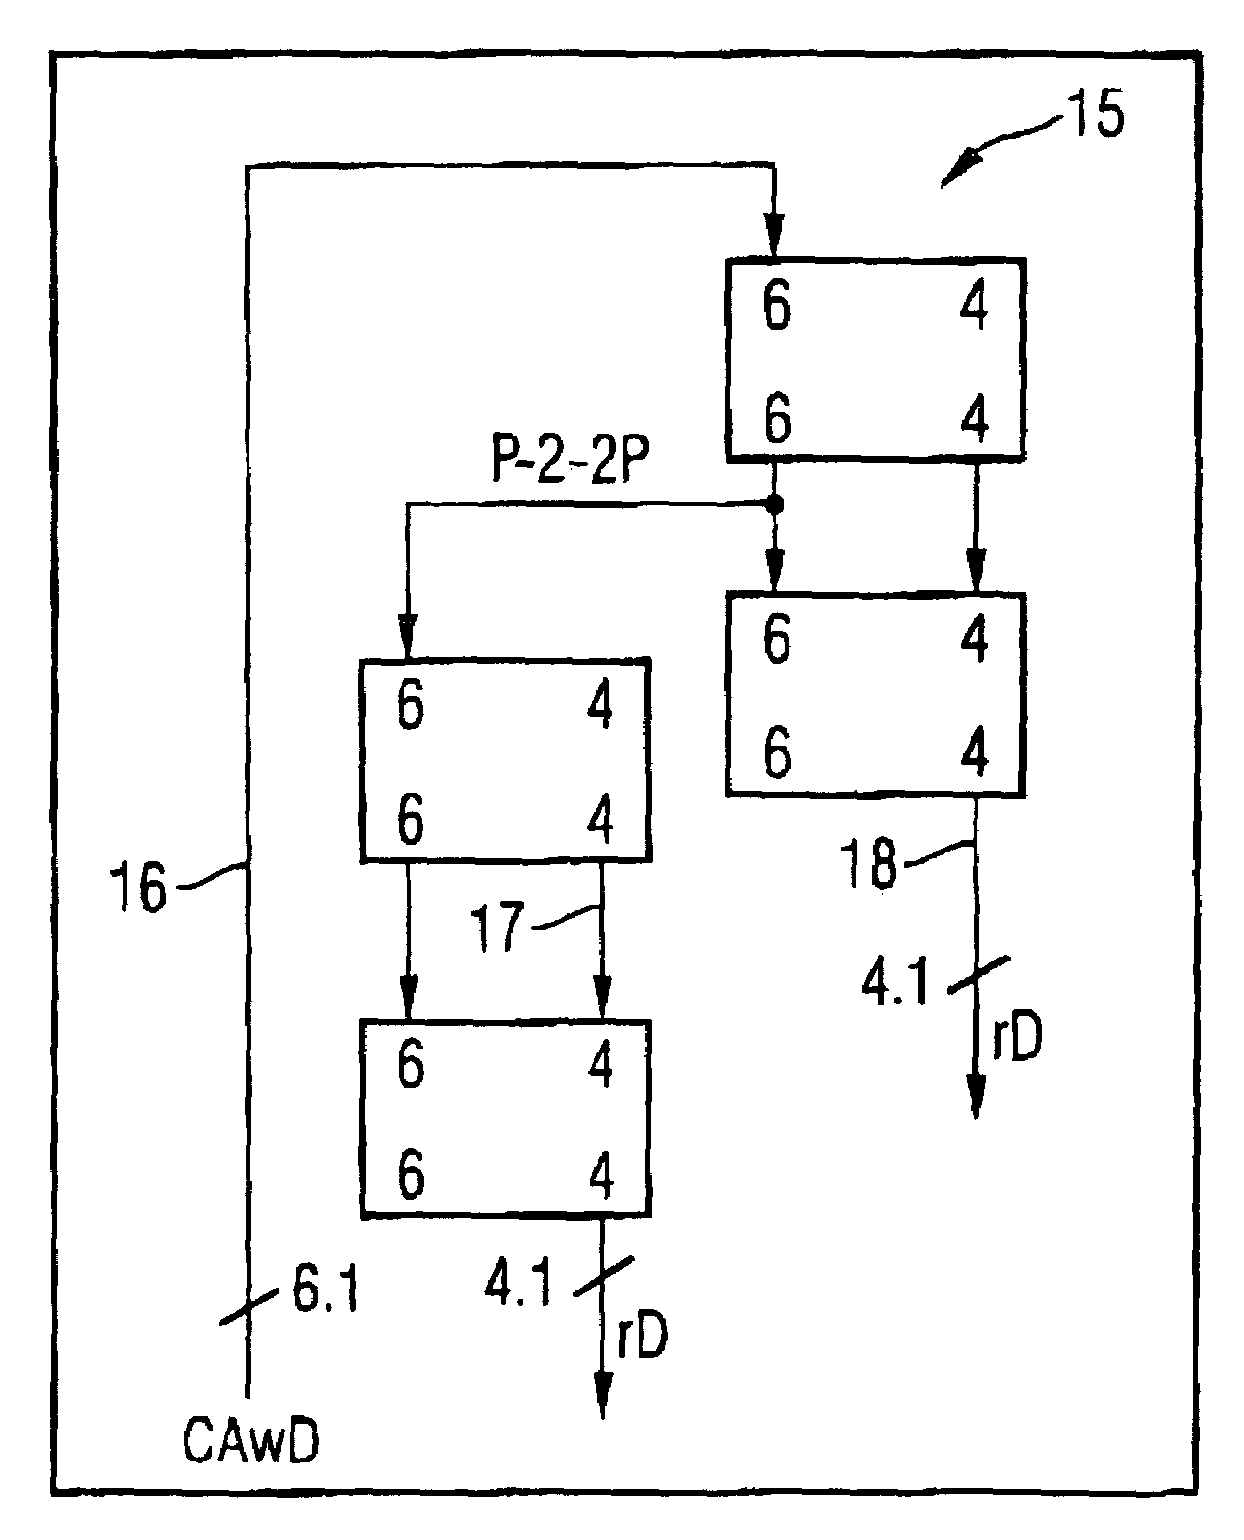 Semiconductor memory arrangement with branched control and address bus